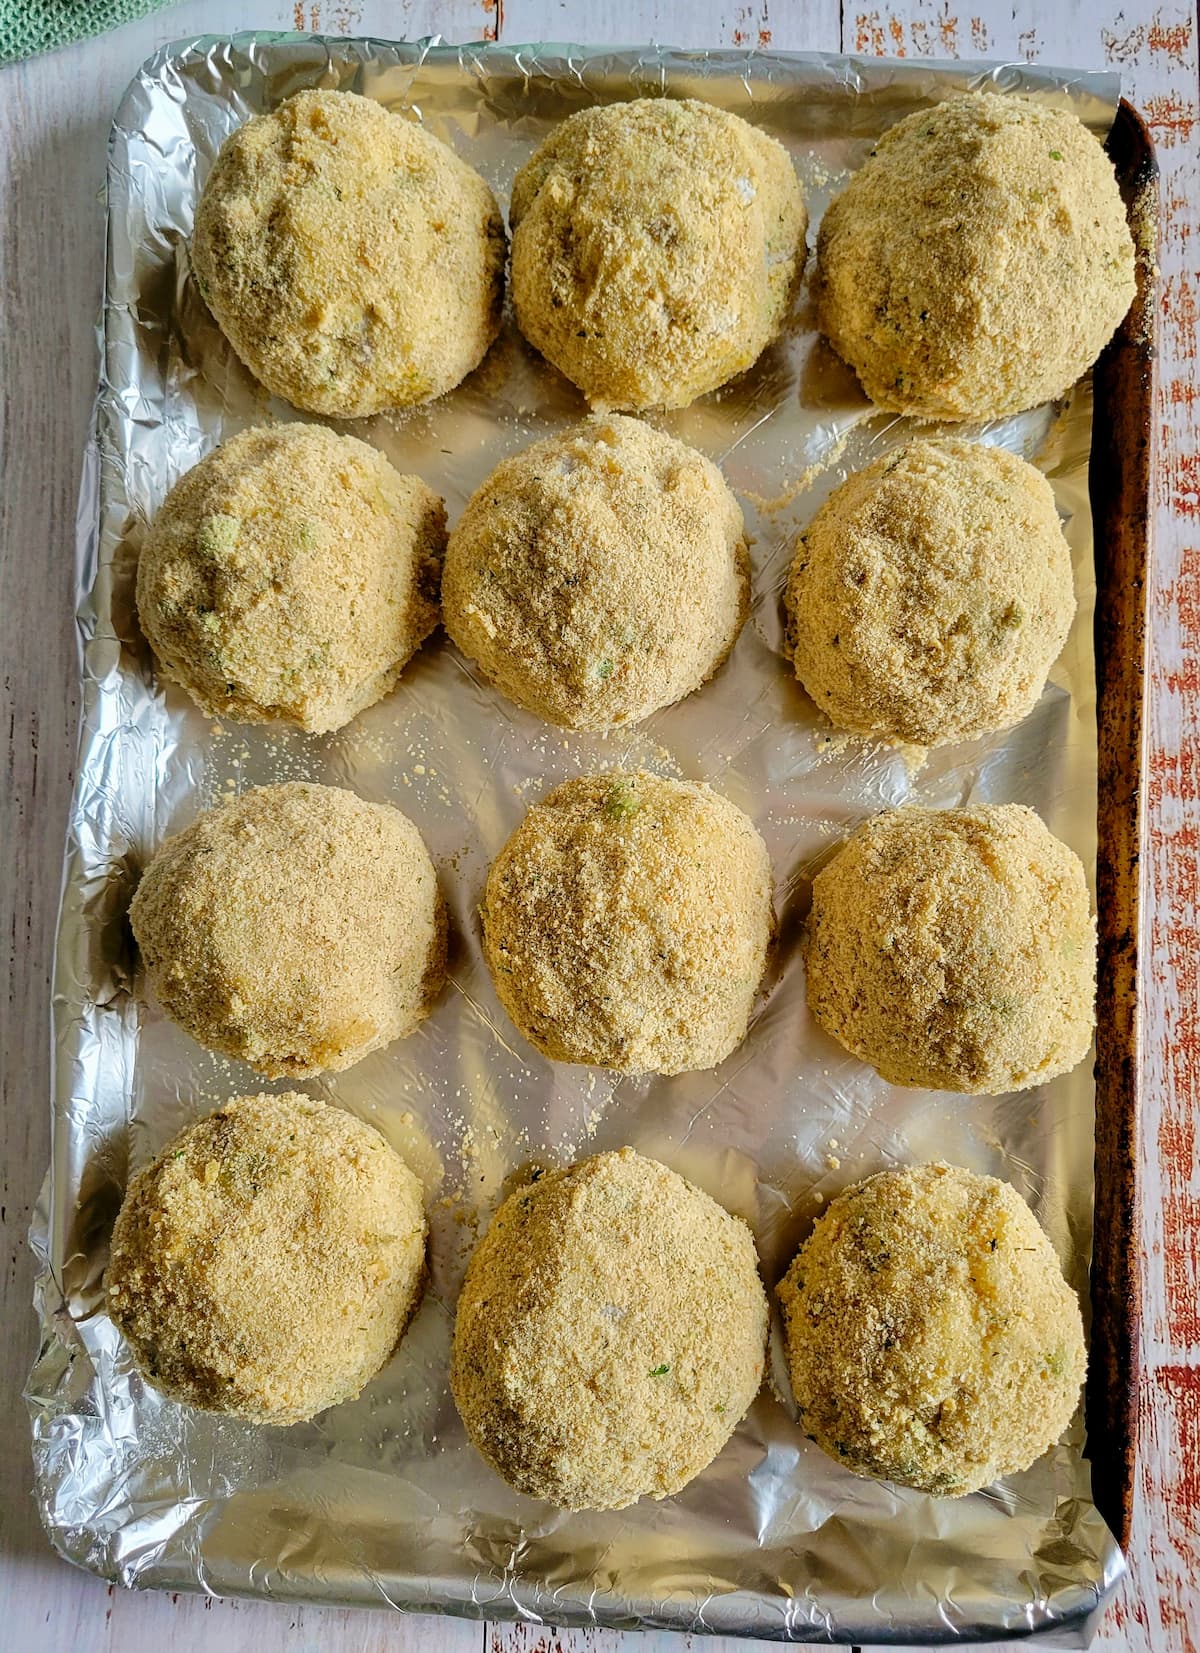 12 breaded uncooked rice balls on a foil lined baking sheet